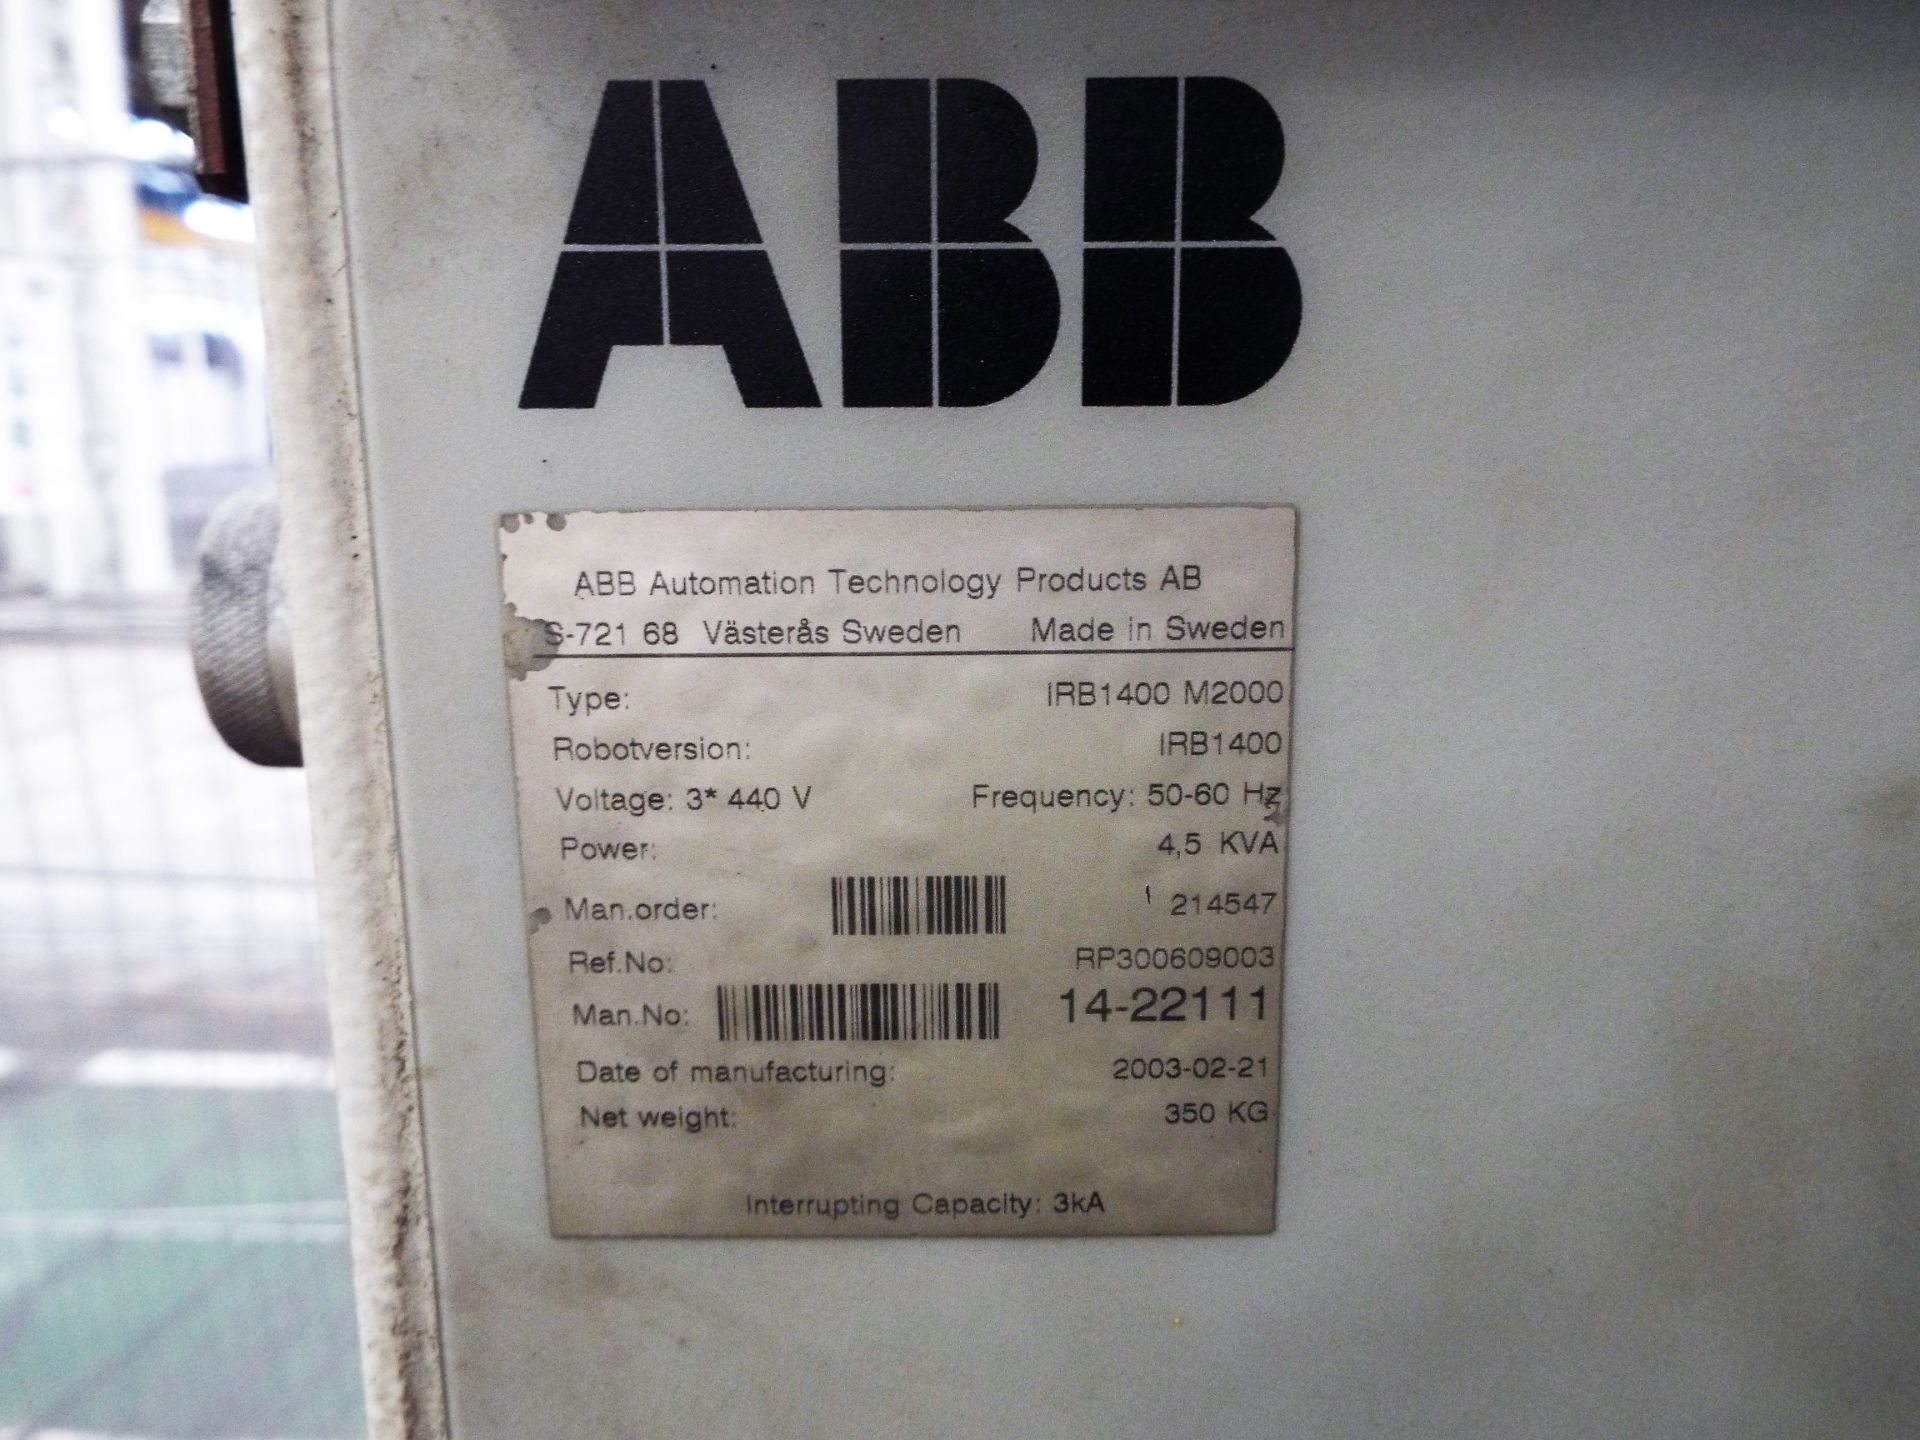 ABB IRB 1400 (M2000) Six Axis Industrial MIG Welding Robot - Image 7 of 10